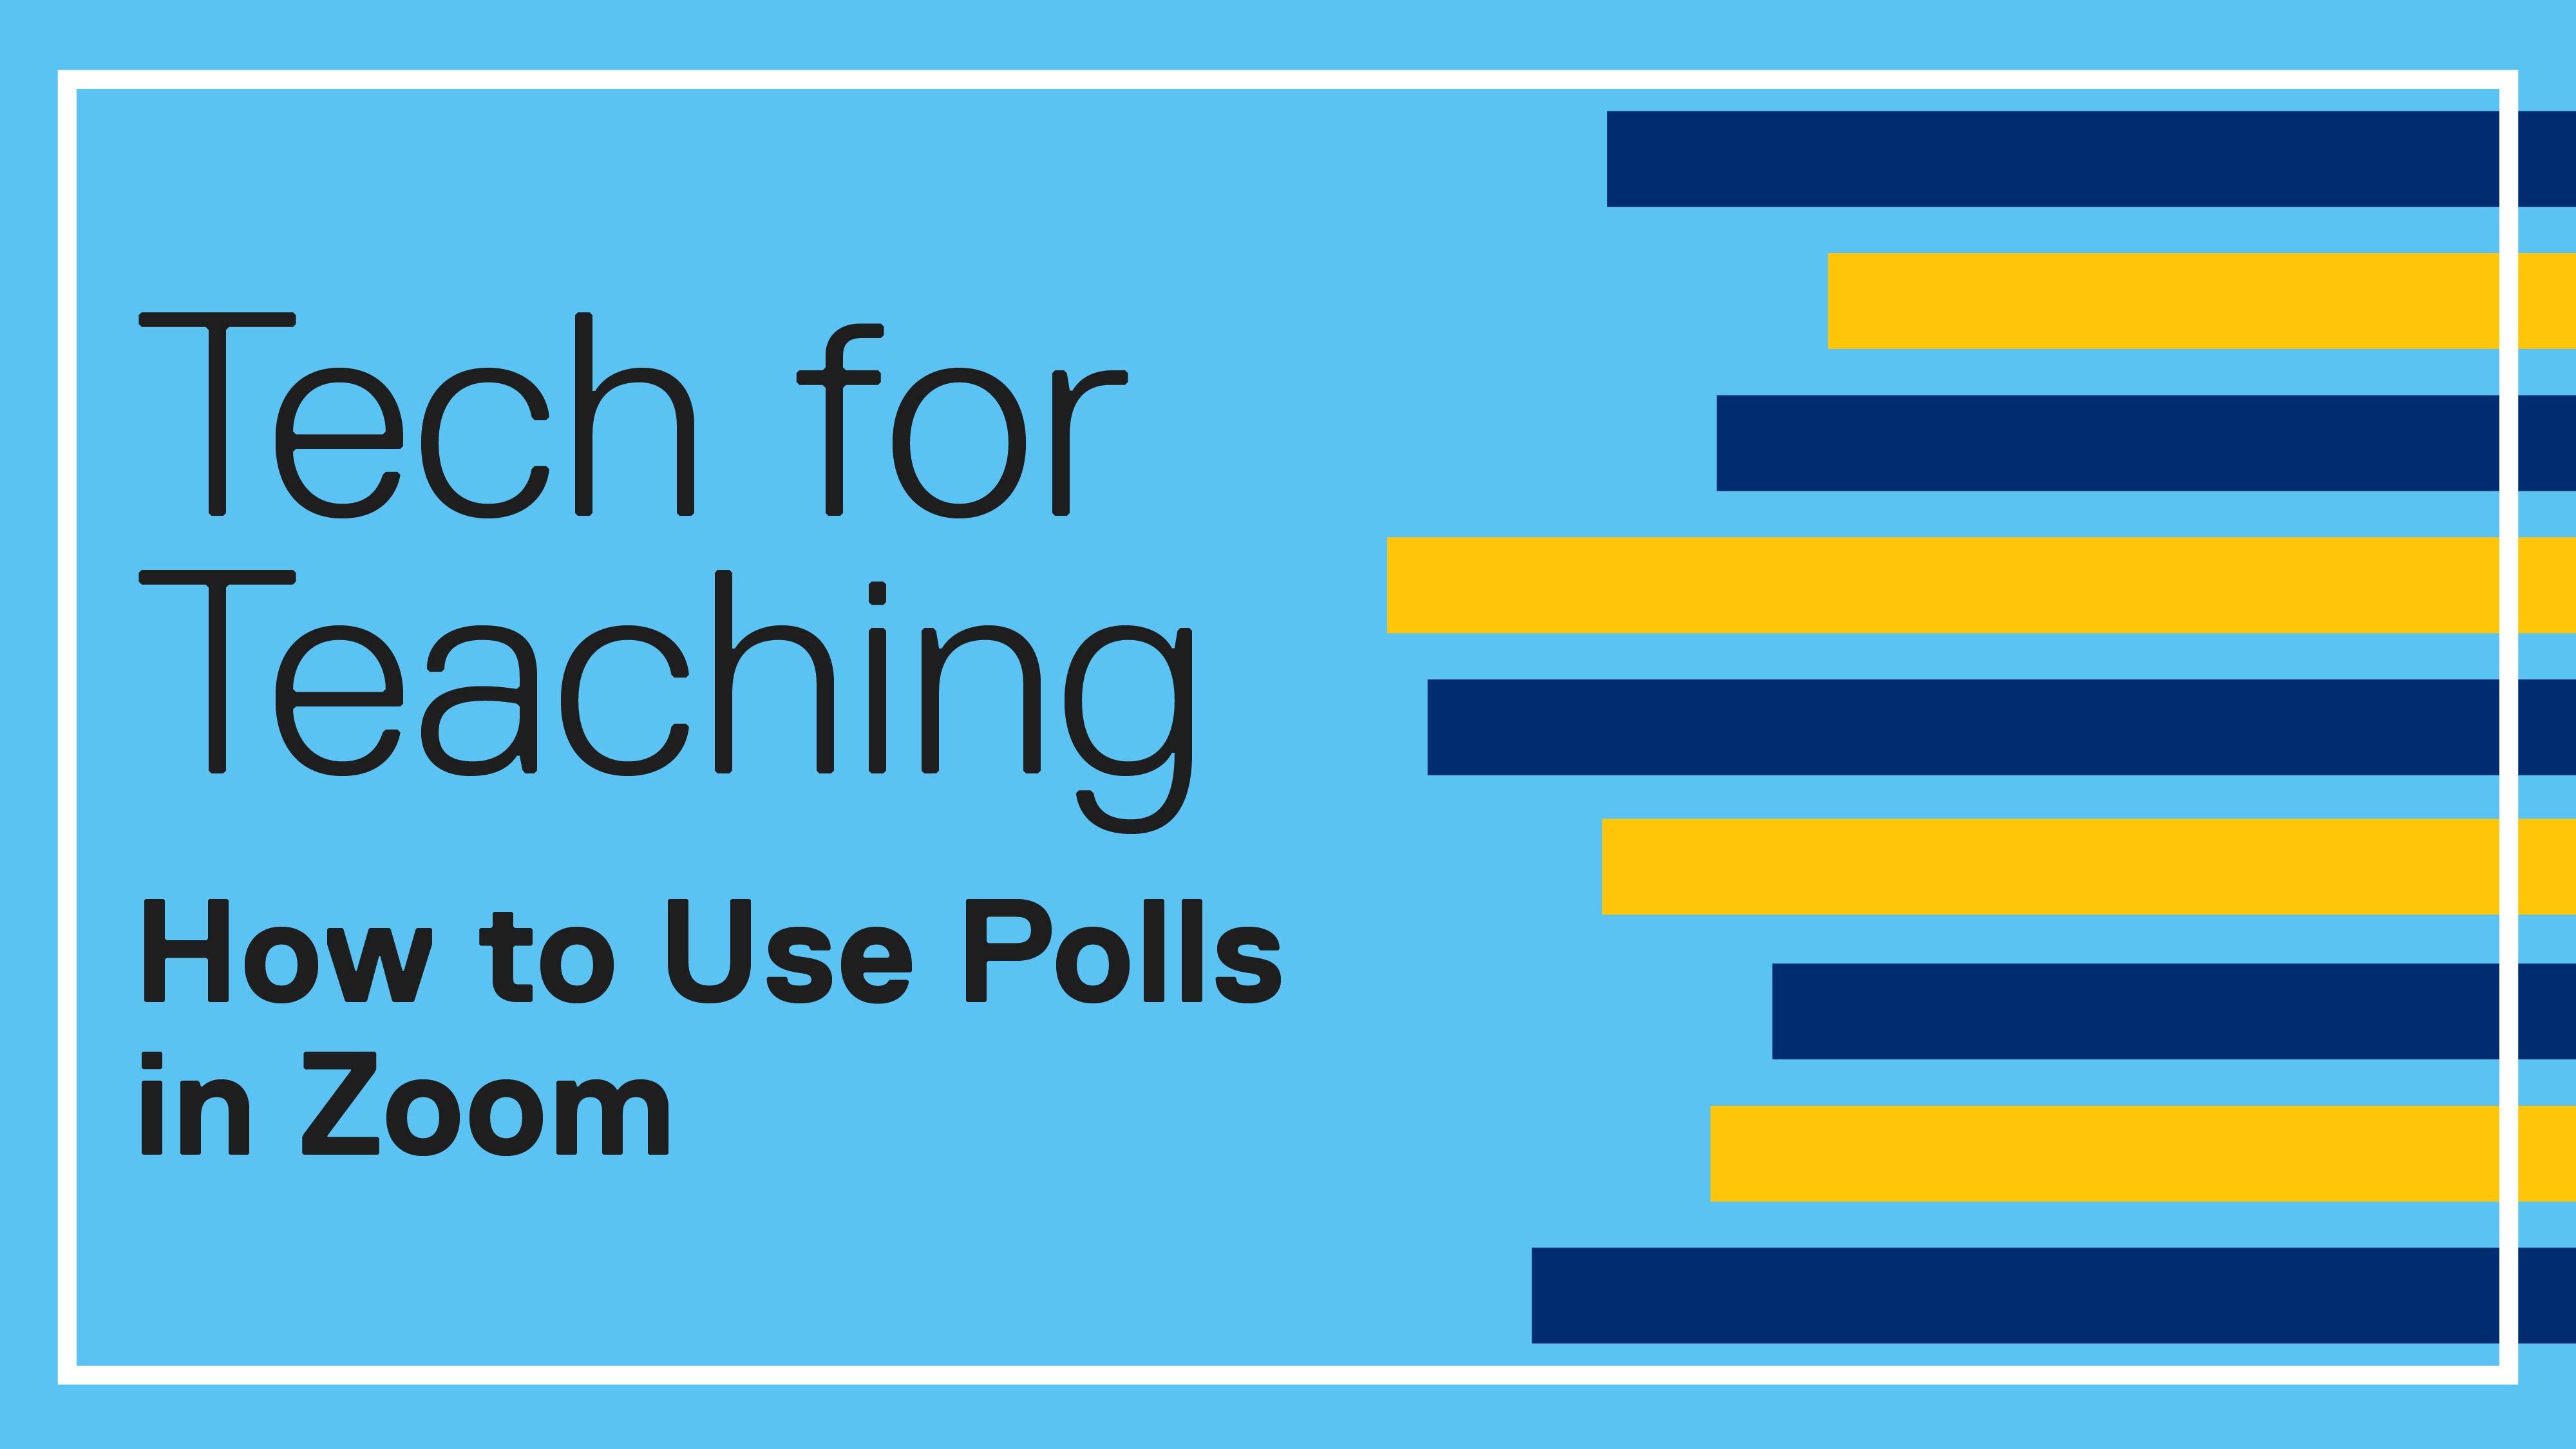 Tech for Teaching: How to Use Polls in Zoom